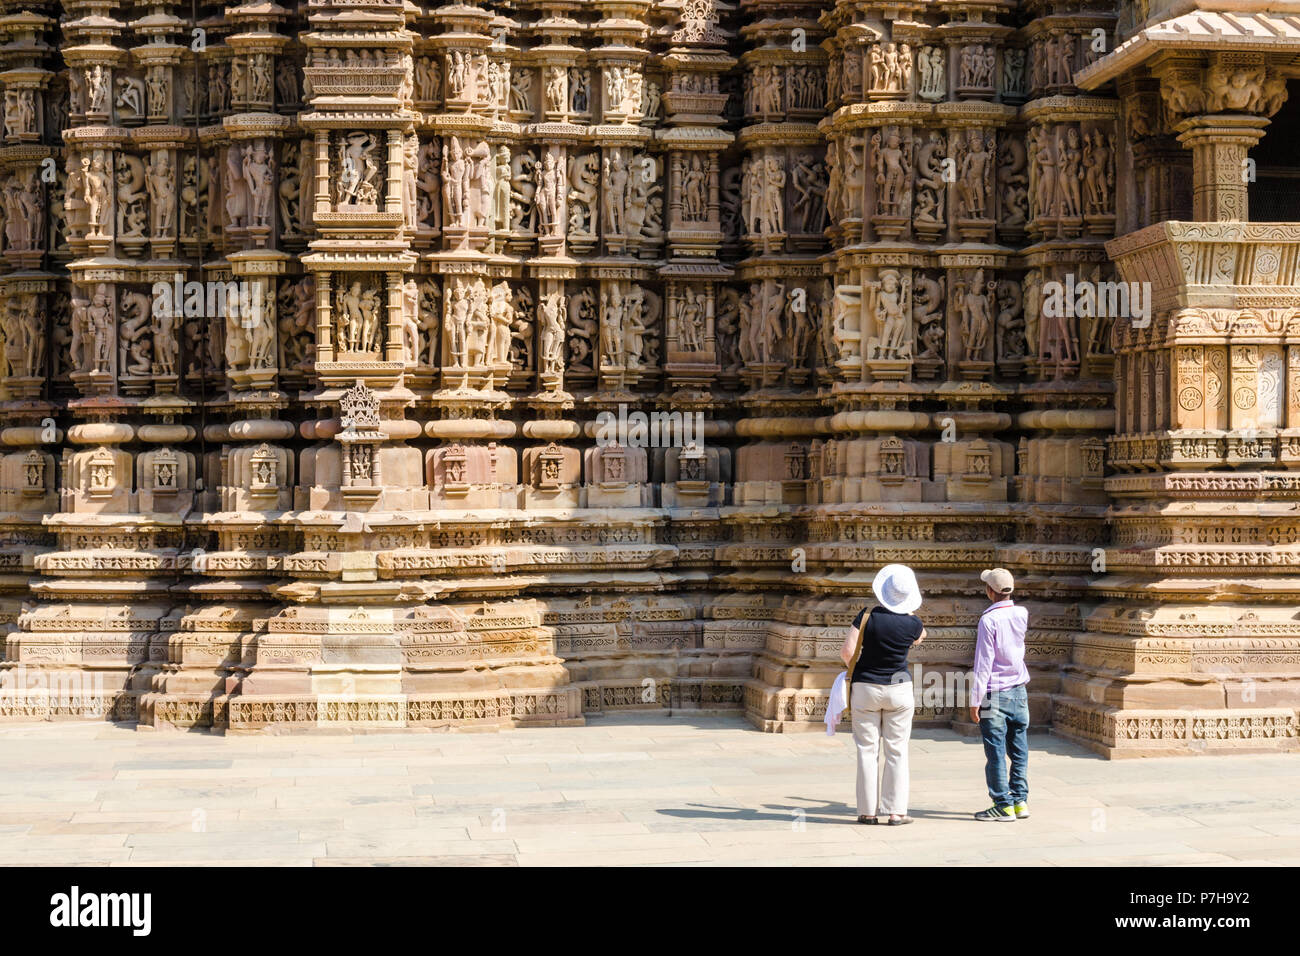 Tourist and Indian guide looking at the sculptures in Khajuraho, UNESCO World Heritage Site, Madhya Pradesh, India Stock Photo